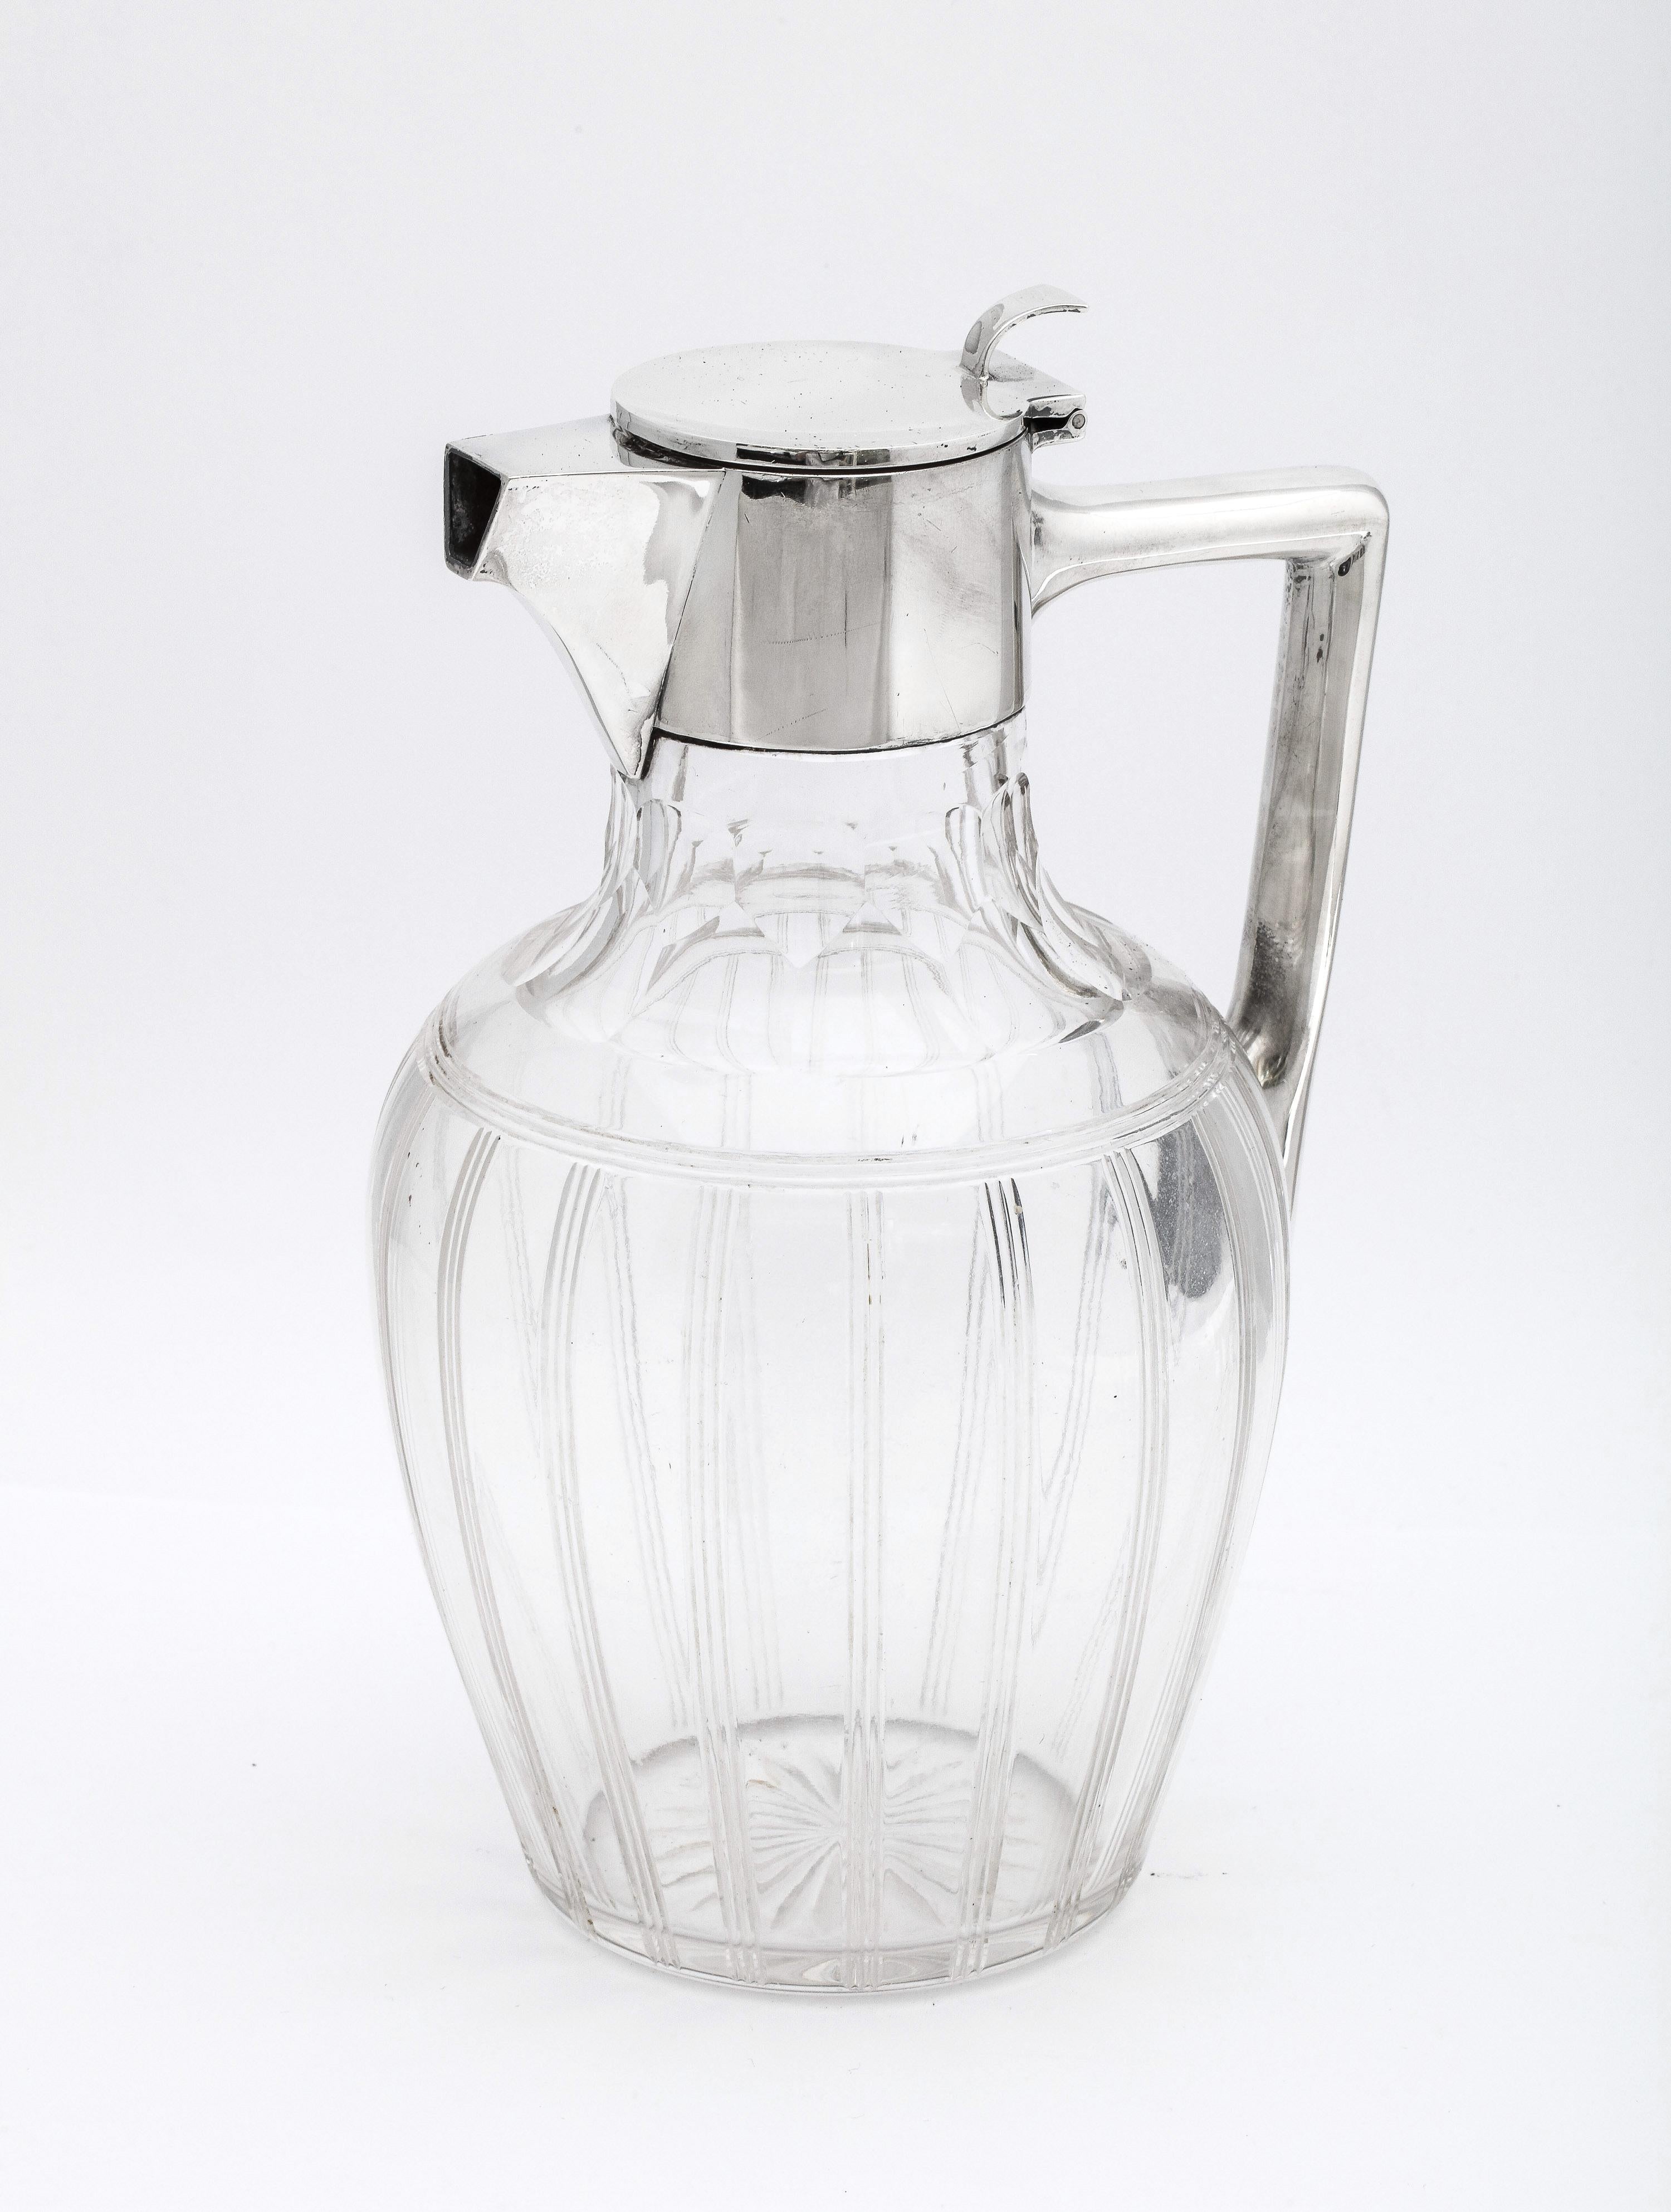 Art Deco period, sterling silver-mounted claret jug, Sheffield, England, year-hallmarked for 1926, Walker and Hall - makers. Lovely, tuxedo-striped glass. Measures 8 3/4 inches high (at highest point) x  5 1/2 inches wide (from outer edge of handle